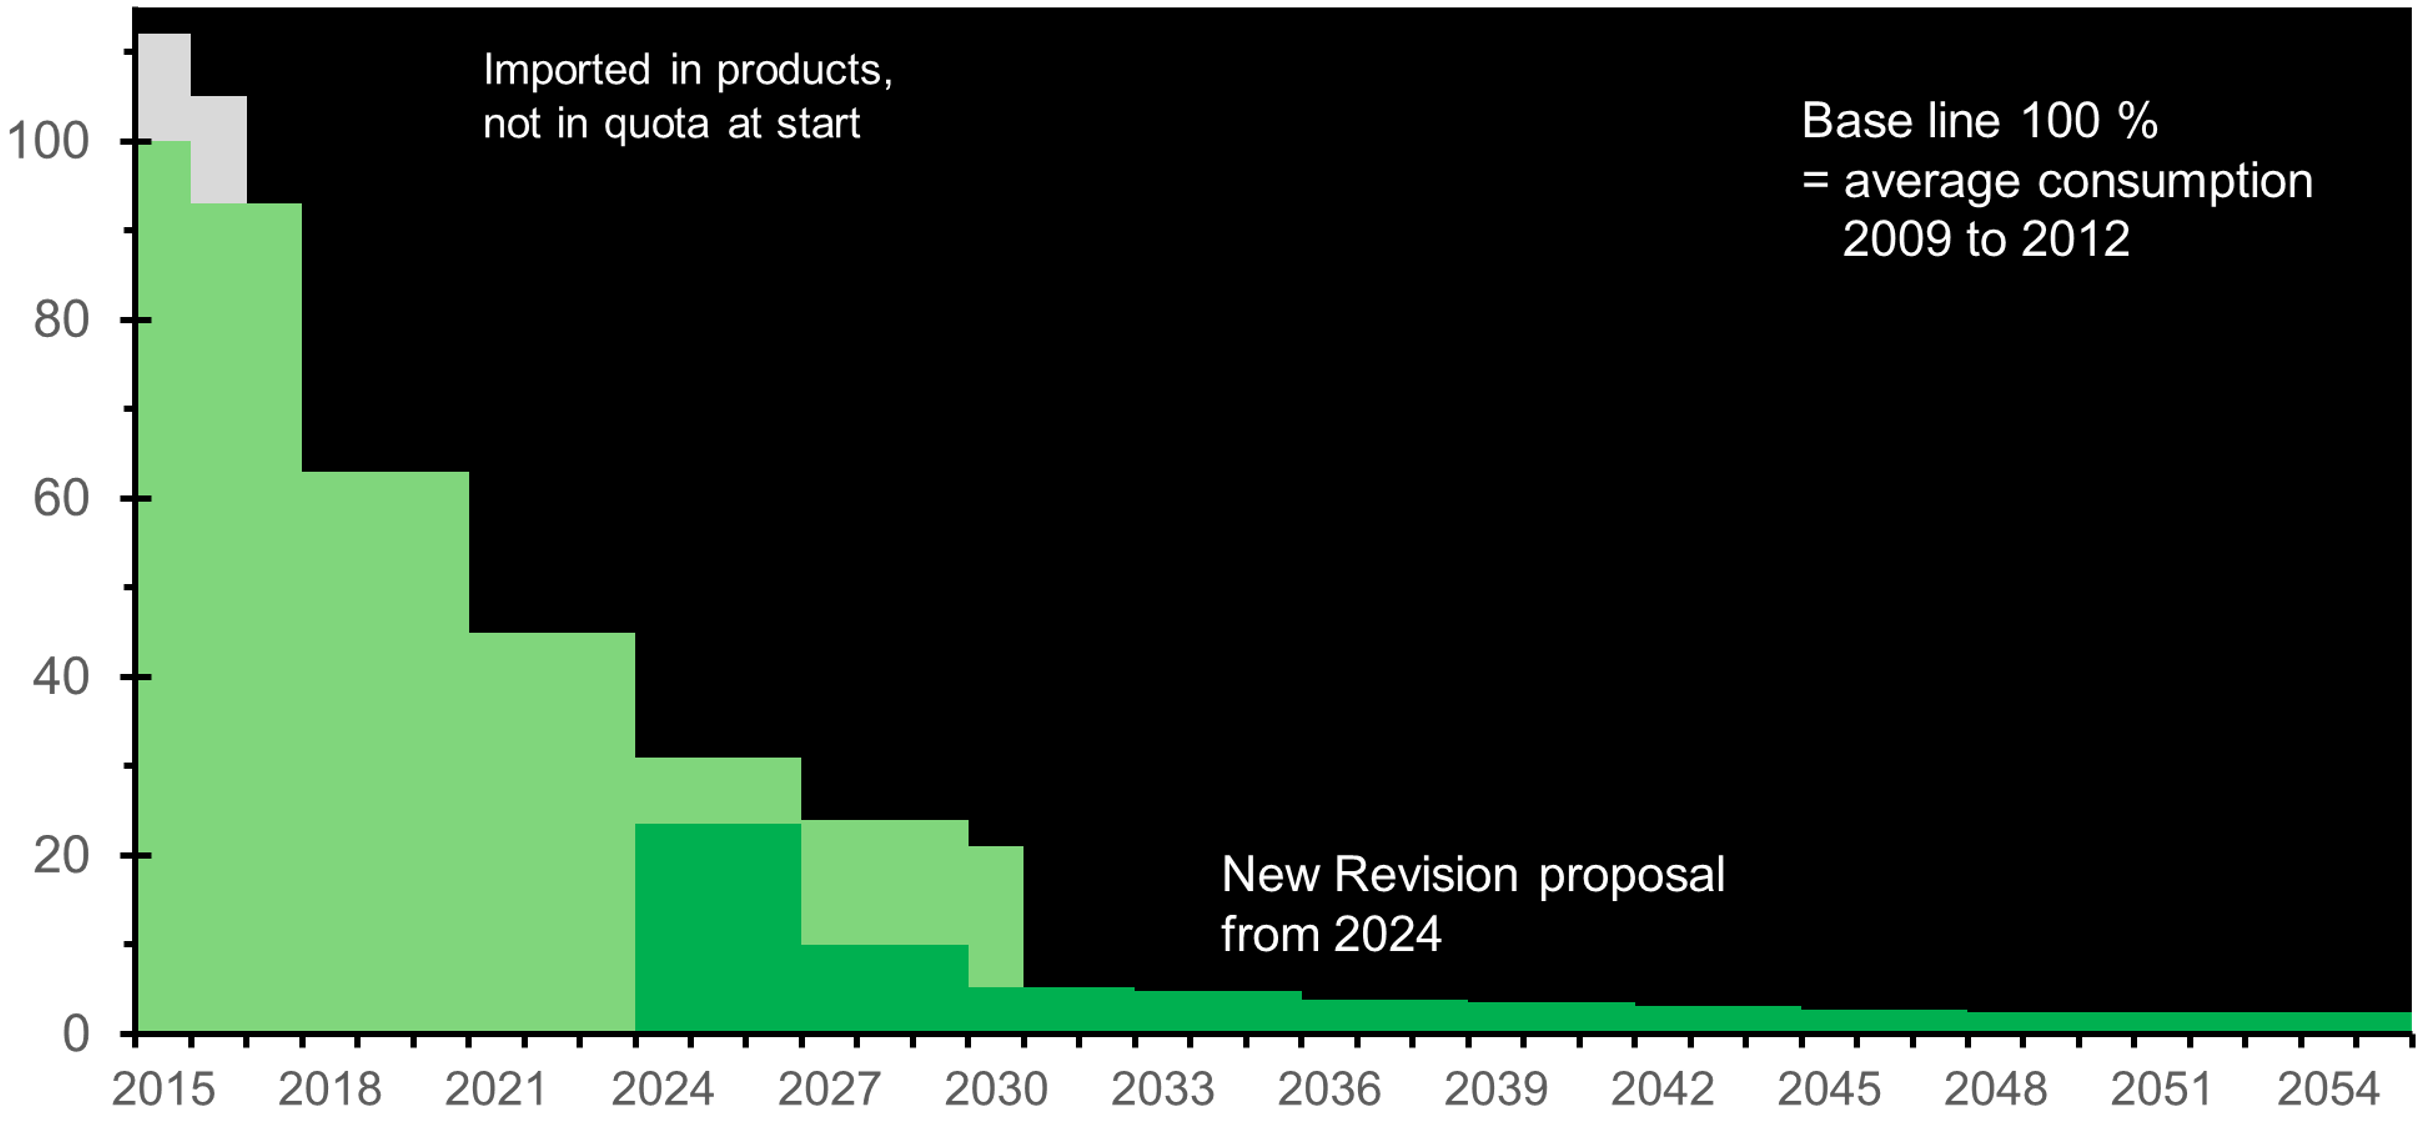 Comparison of the phase-down steps in % of Regulation 517/2014 (in light green), starting at 100% in year 2015, and the phase-down of the proposal (in dark green) from 2024. In light gray: amount in imported products, not included in original base amount.